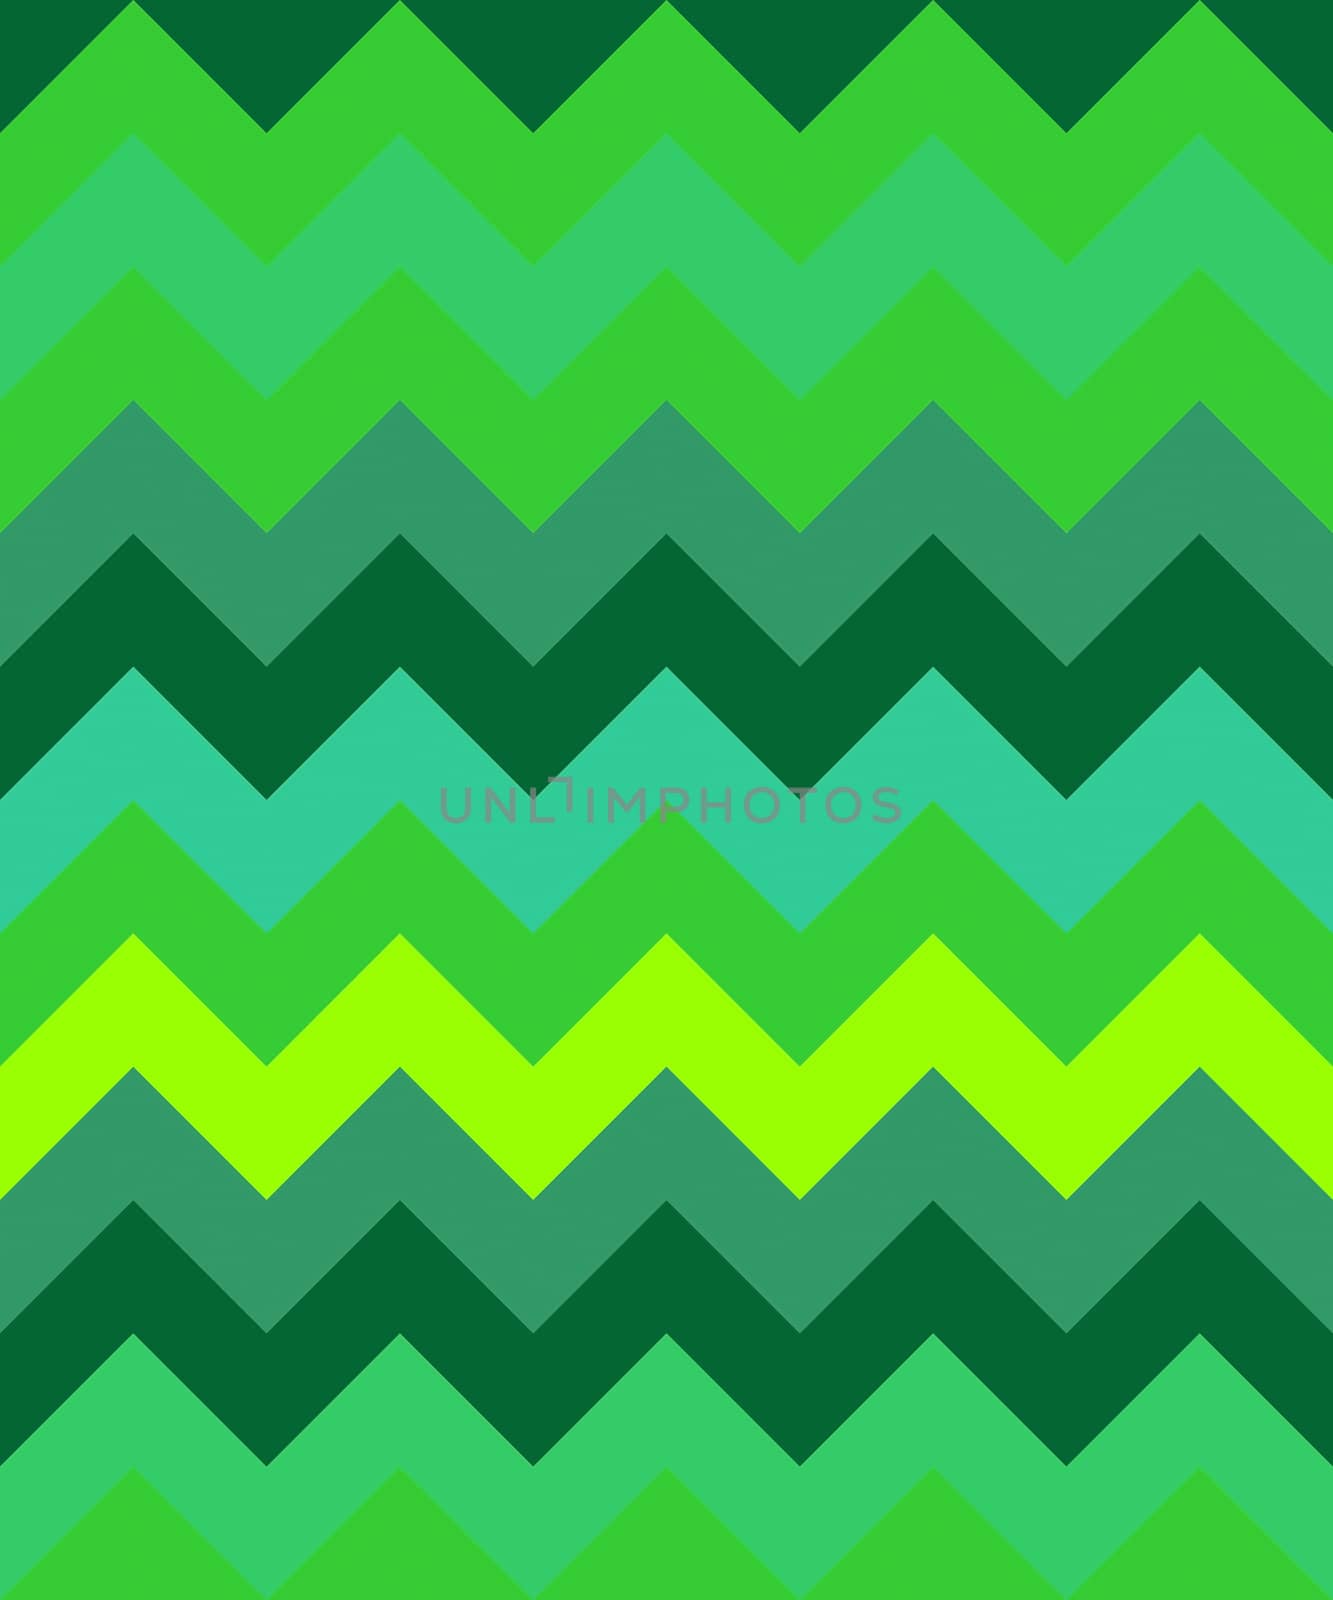 abstract zig zag background wave green triangles pattern